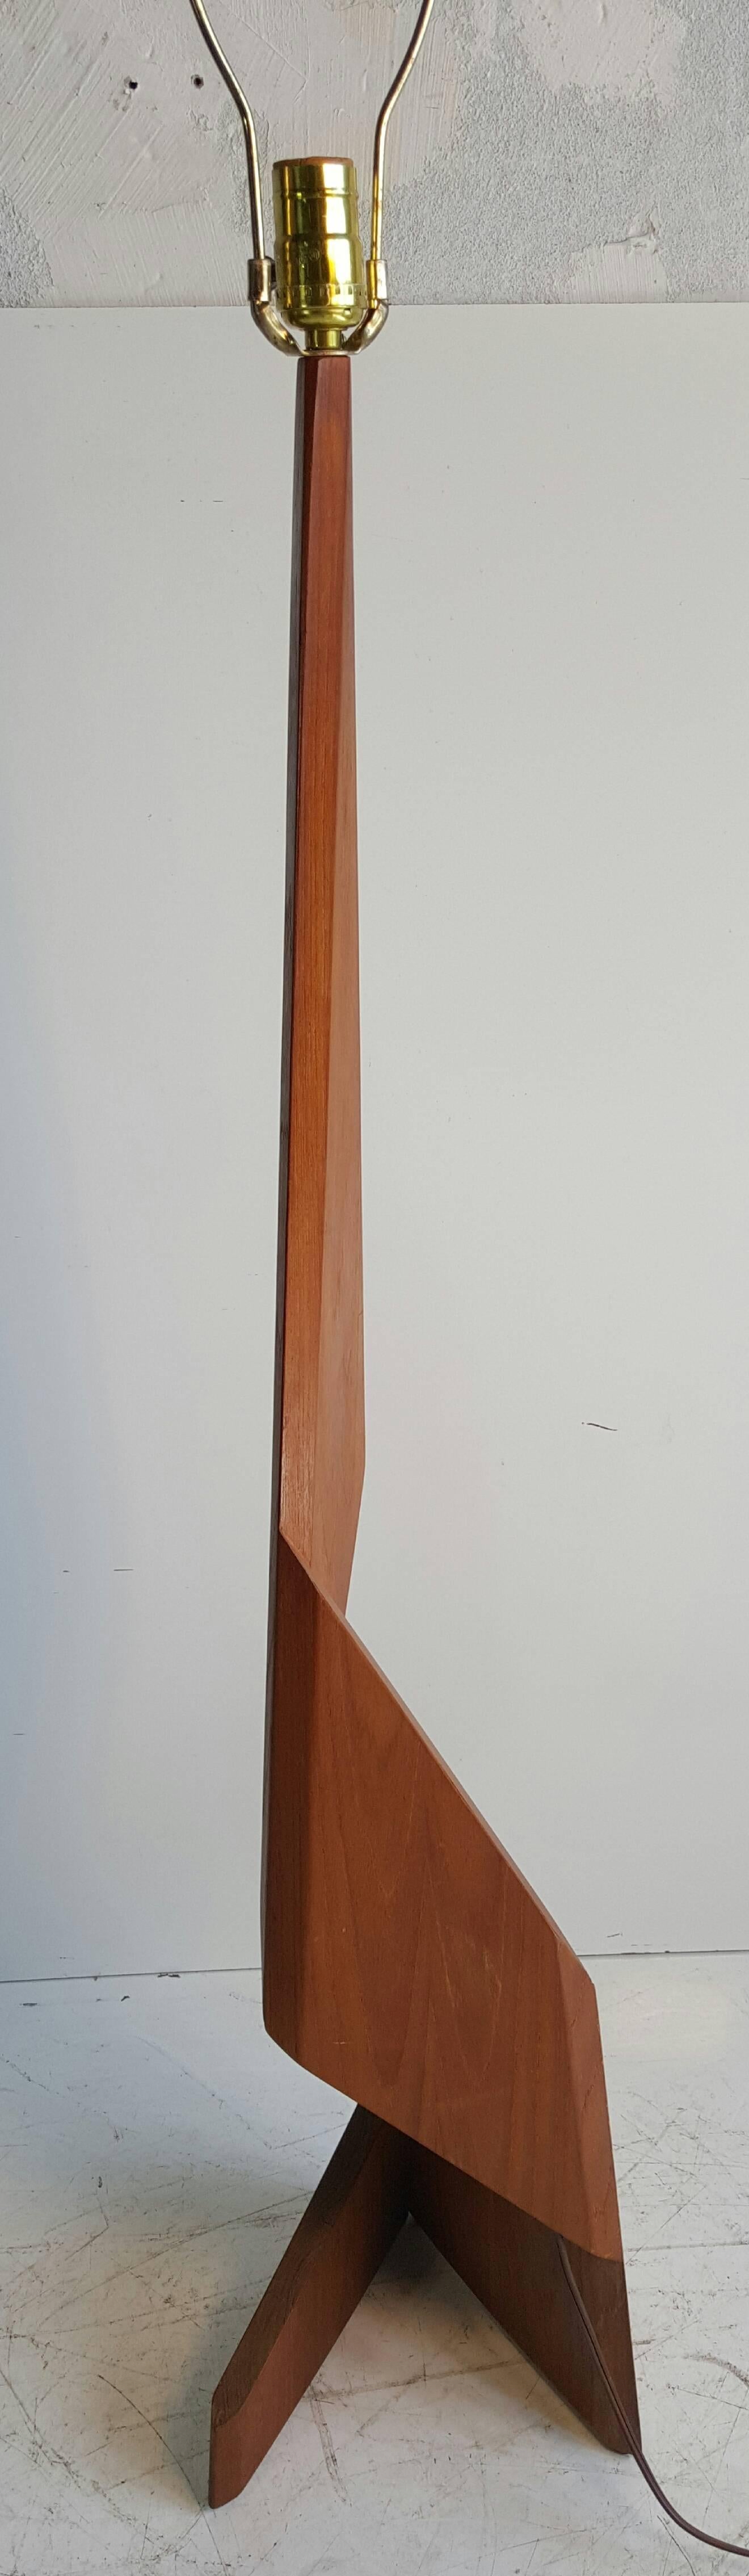 Danish modern floor lamp. Solid teak construction. Beveled, architecturally stacked. Retains original shade, minor water staining to shade.